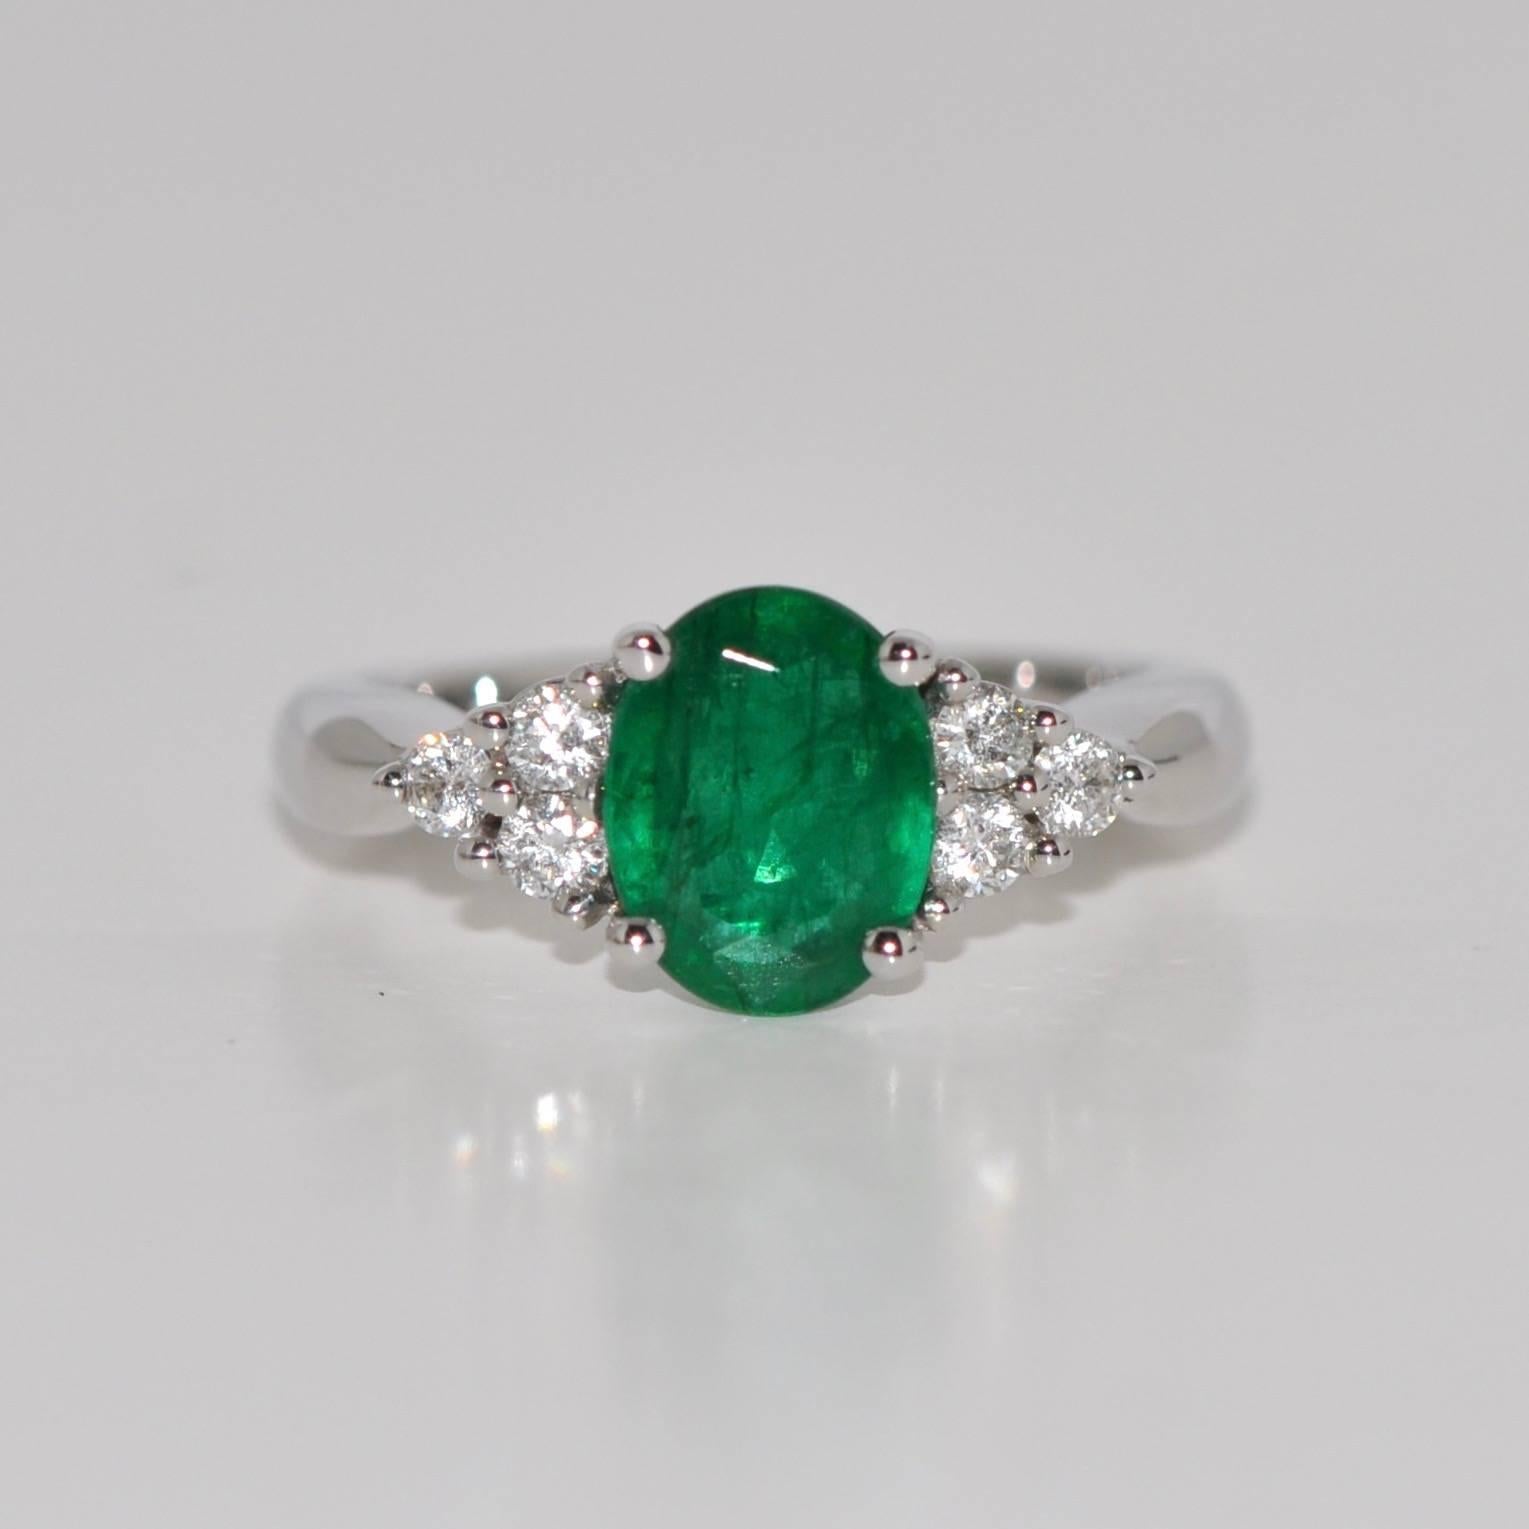 Discover this Emerald and White Diamonds White Gold Engagement Ring.
Oval Emerald 1.52 Carat
6 White Diamonds 0.27 Carat
White Gold 18 Carat
French Size 53
US Size 6 1/4
